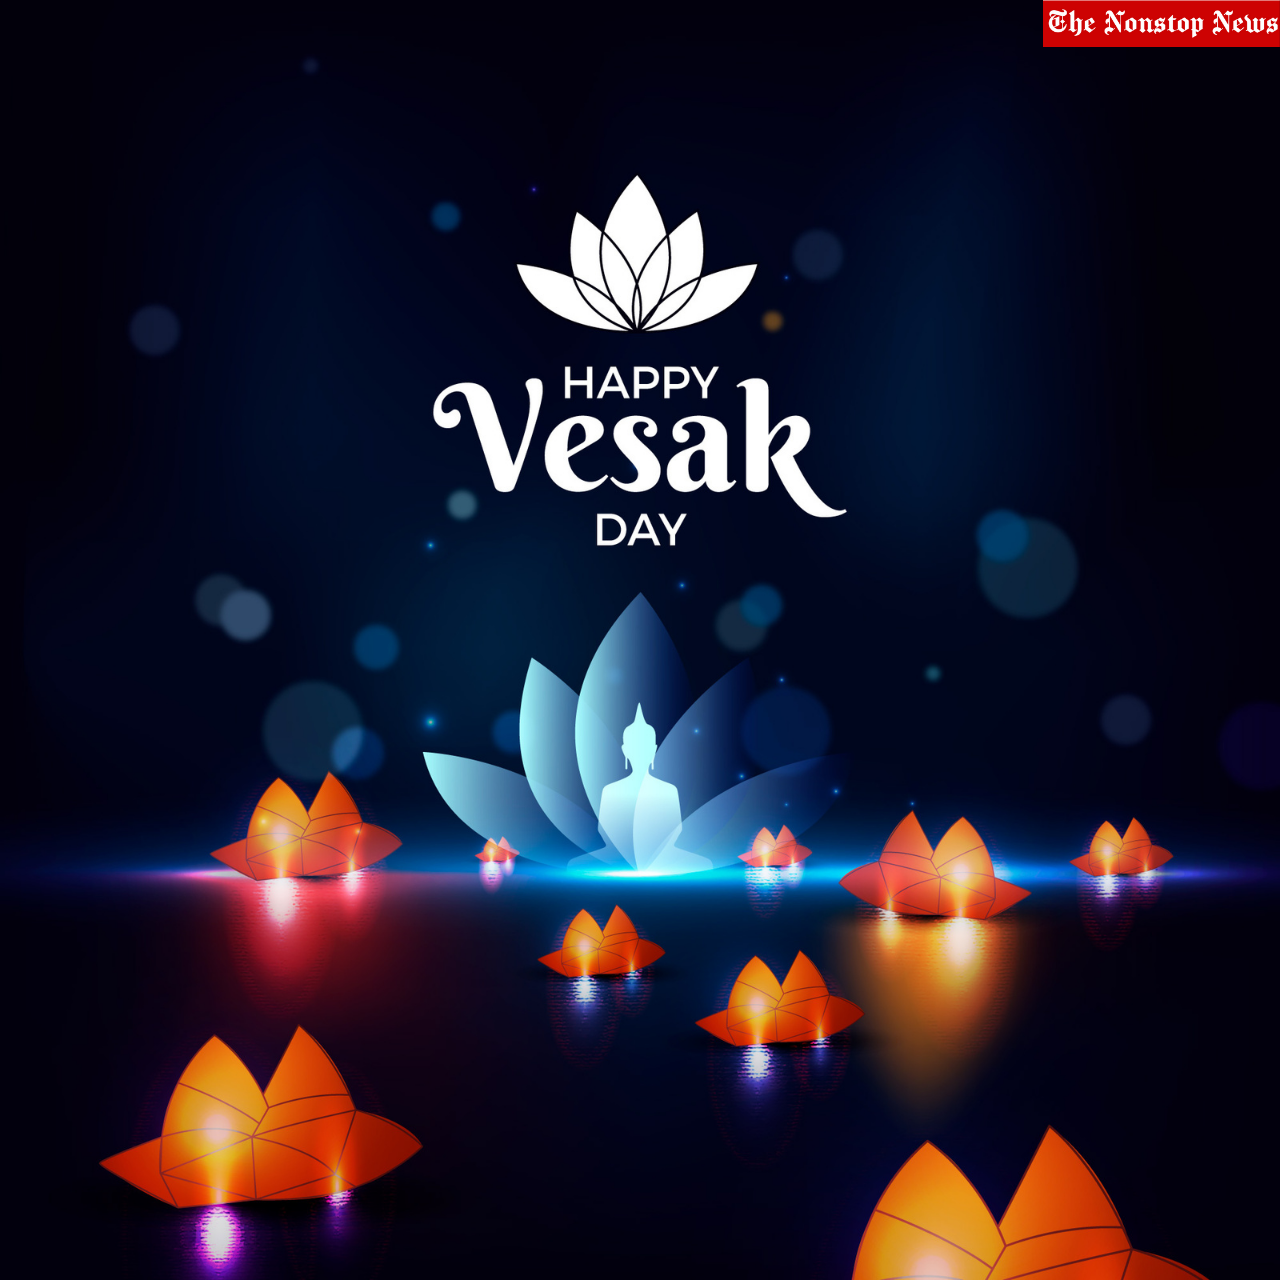 Happy Vesak 2022: Best Wishes, HD Images, Clipart, Messages, Greetings, Quotes To Share